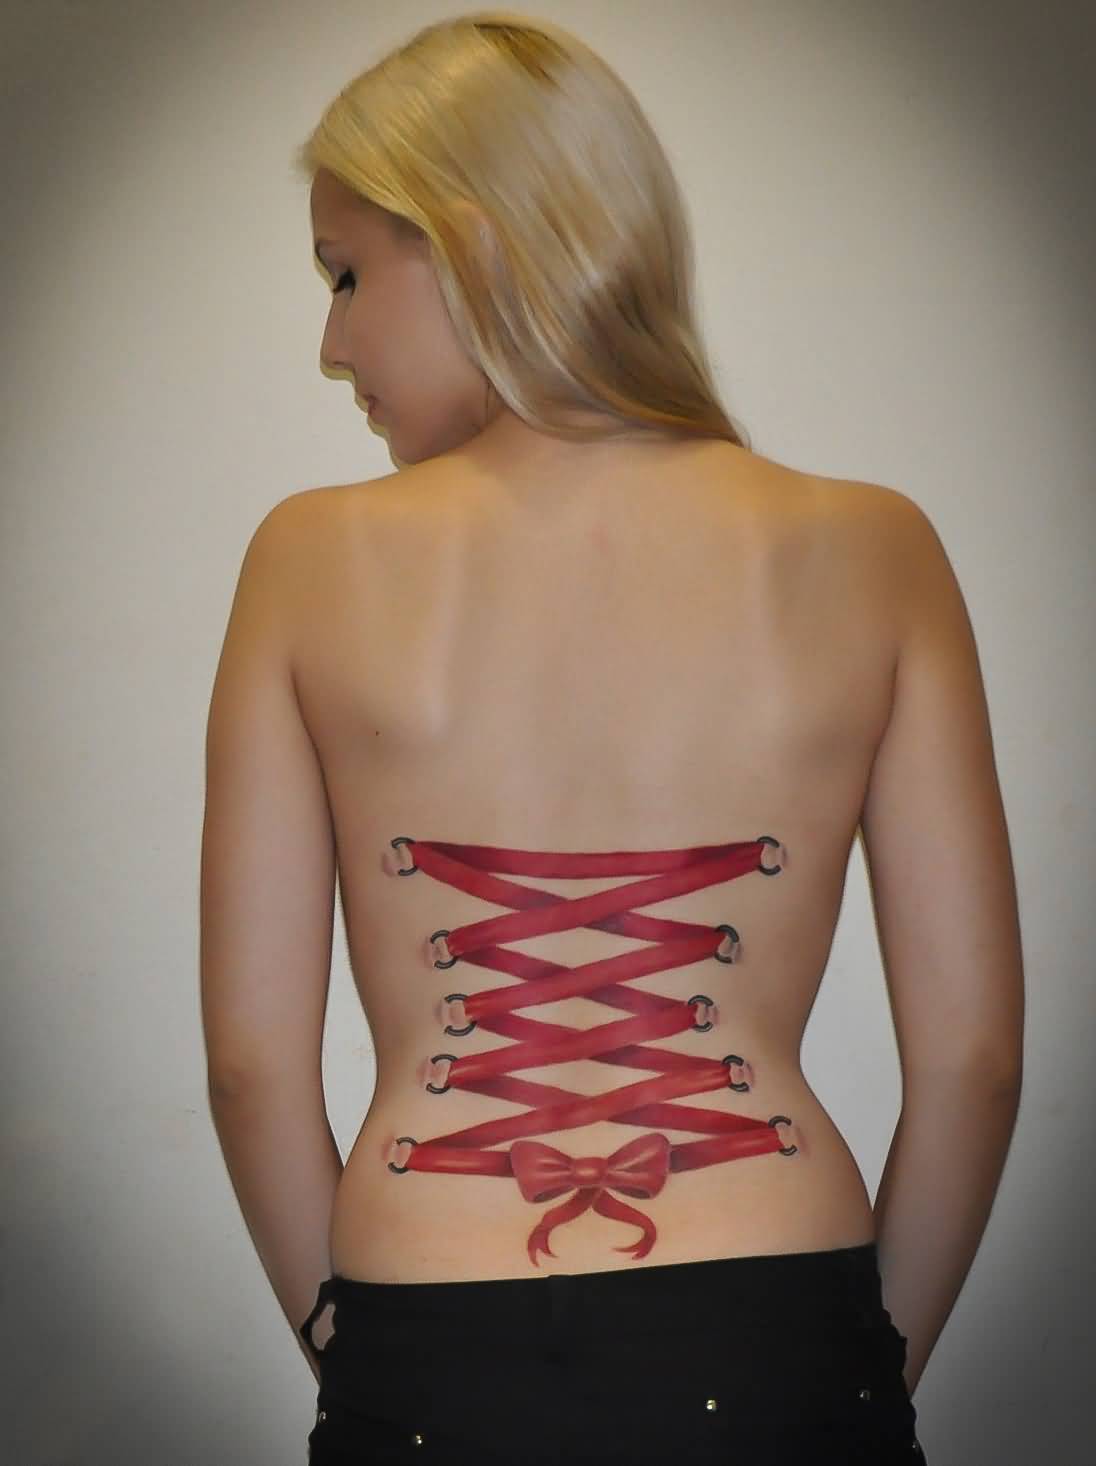 Red Ink Corset With Bow Tattoo On Women Full Back